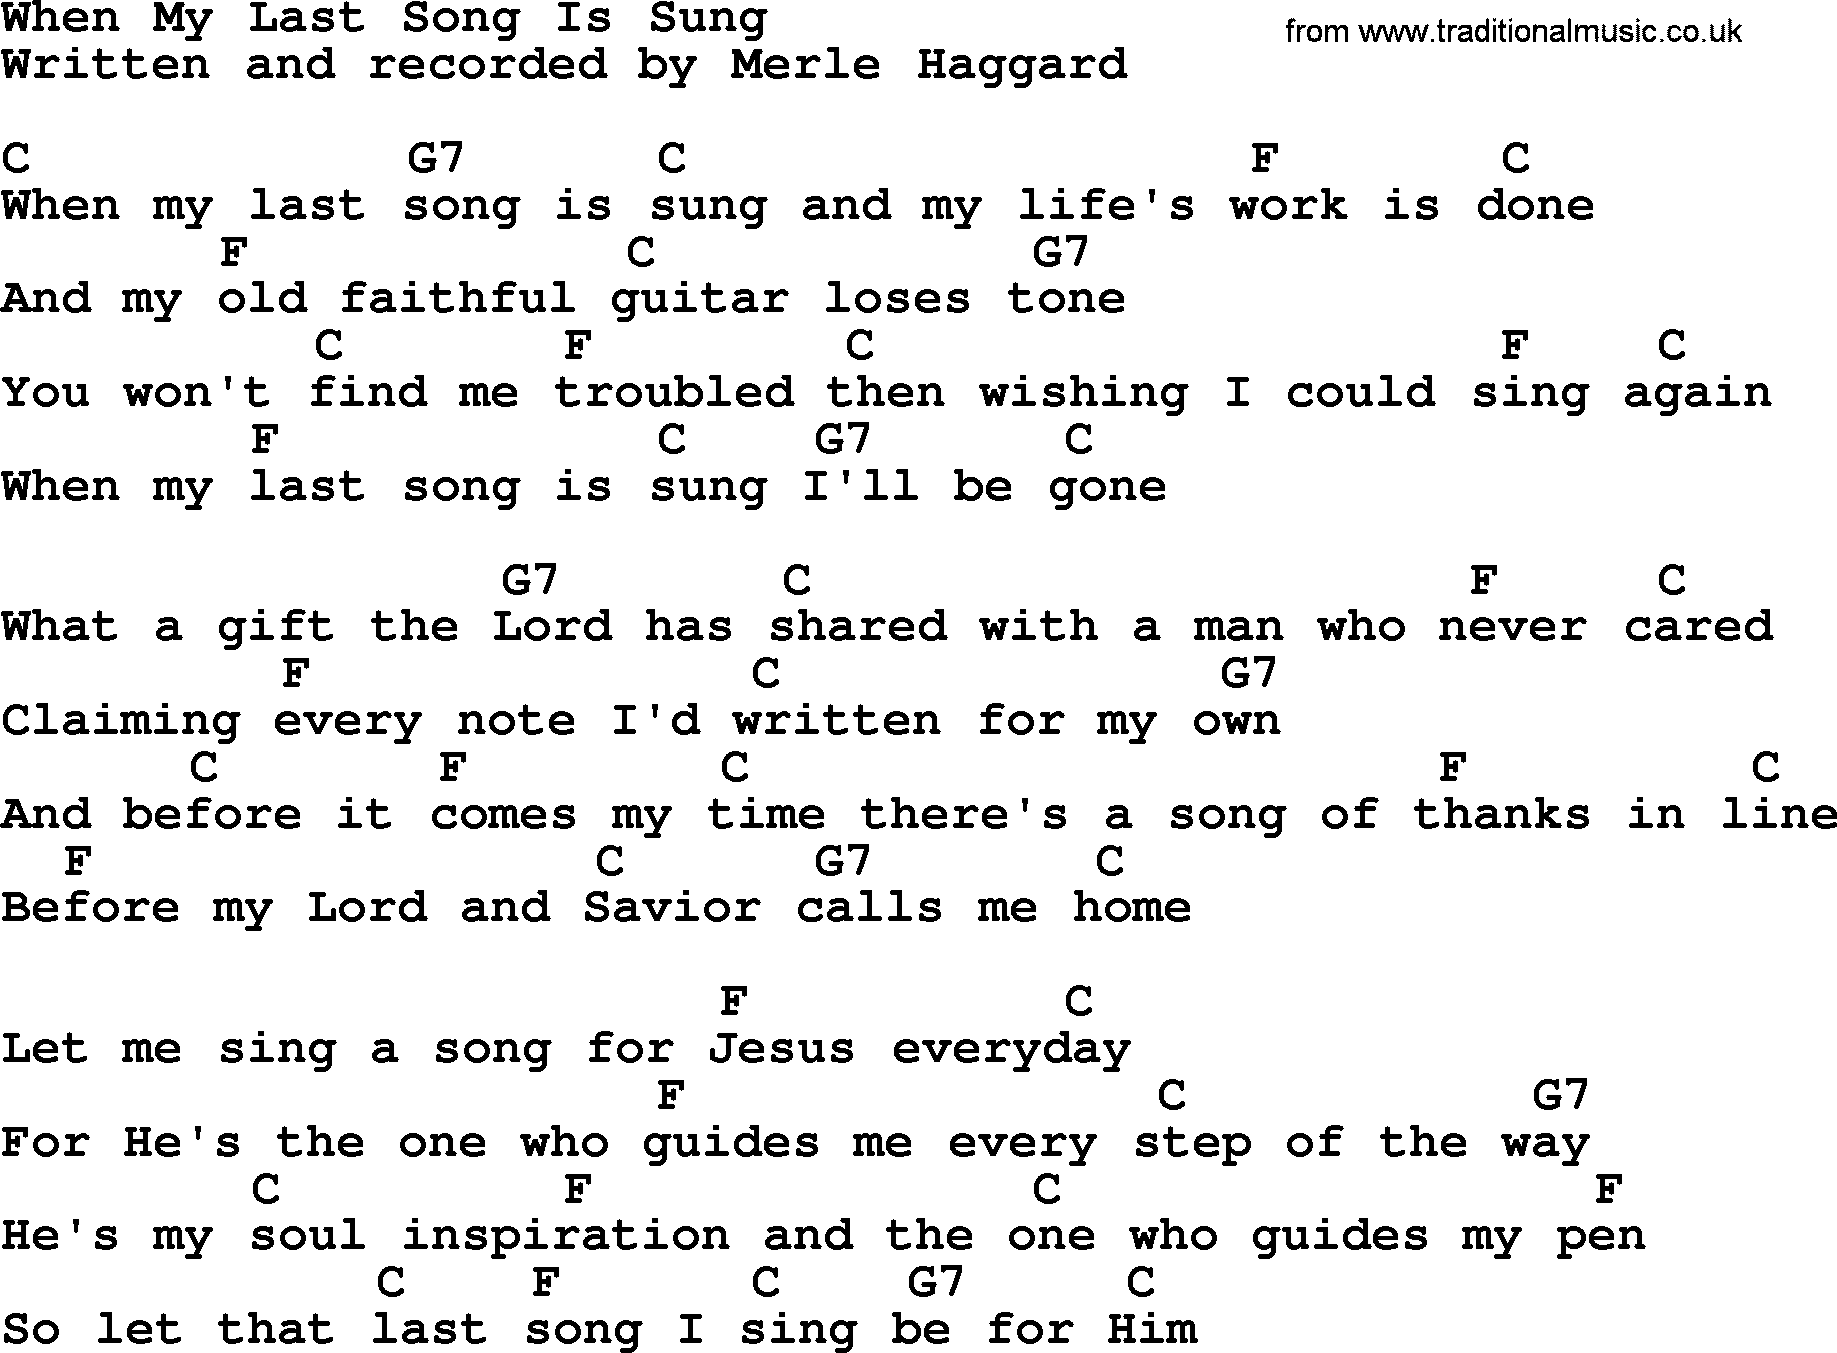 Merle Haggard song: When My Last Song Is Sung, lyrics and chords